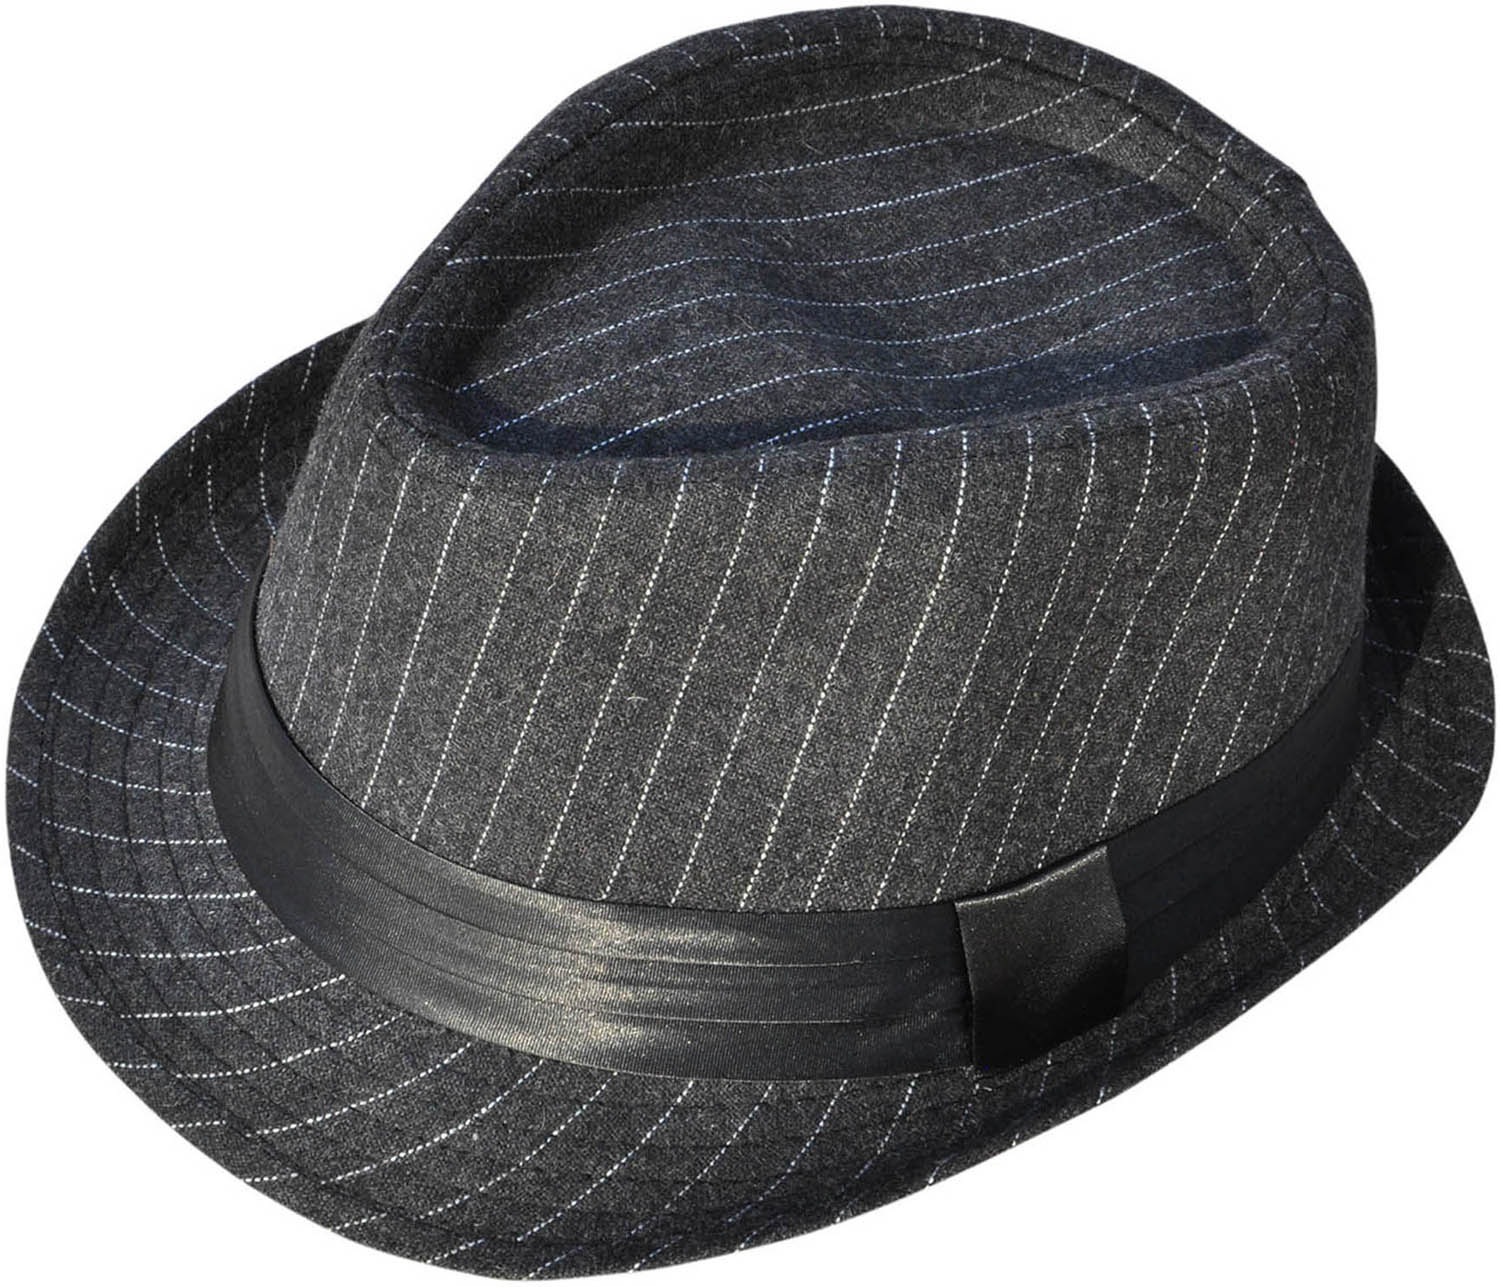 Simplicity Unisex Structured Gangster Trilby Wool Fedora Hat, 3075_Charcoal Gy - image 1 of 4